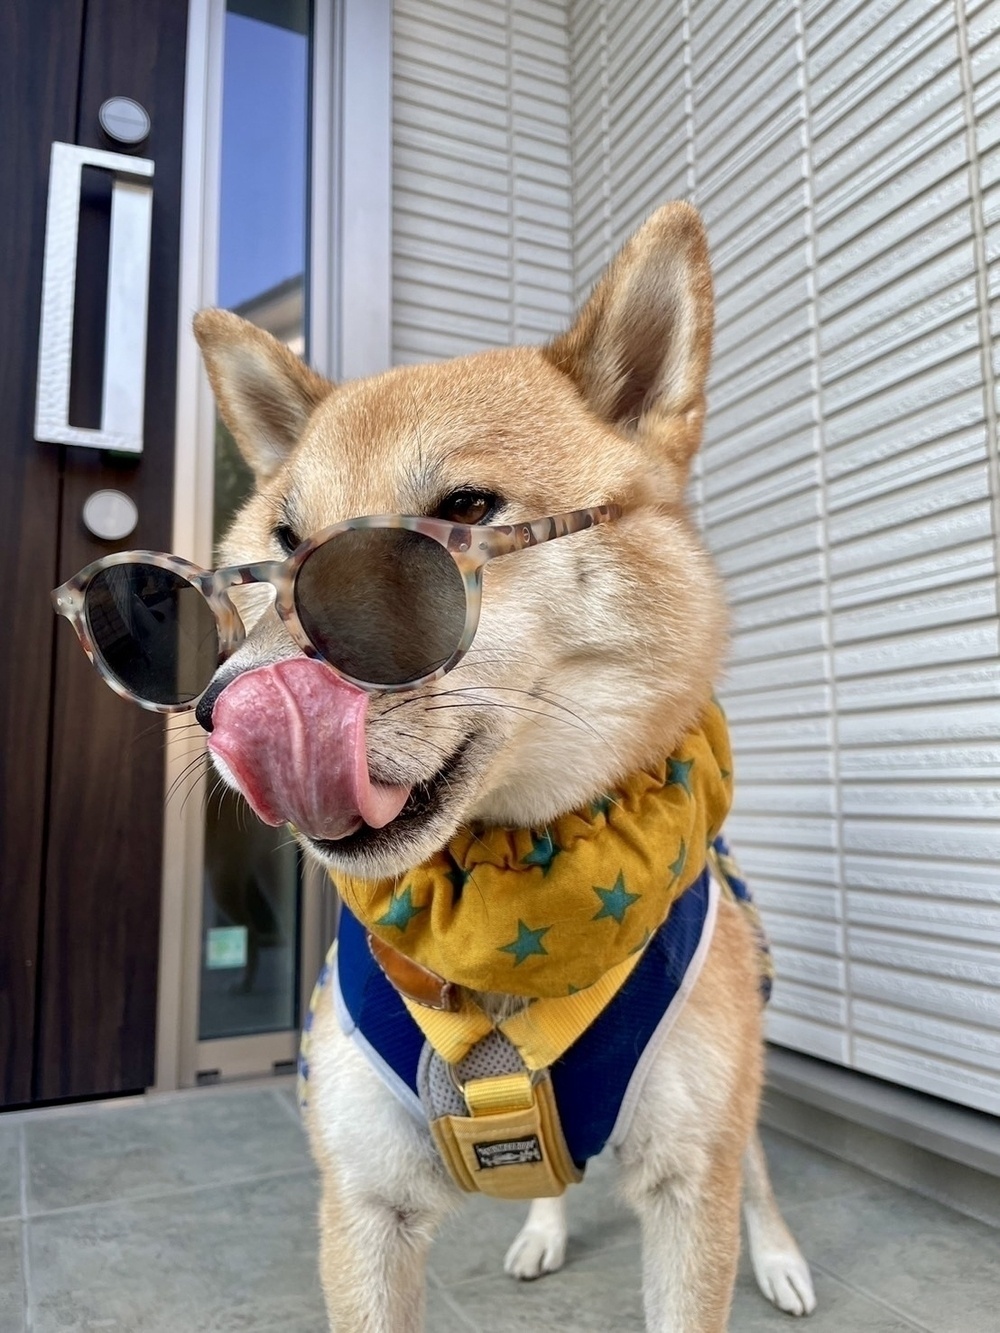 A dog wearing sunglasses and a yellow scarf with stars licks its nose while standing in front of a building entrance.